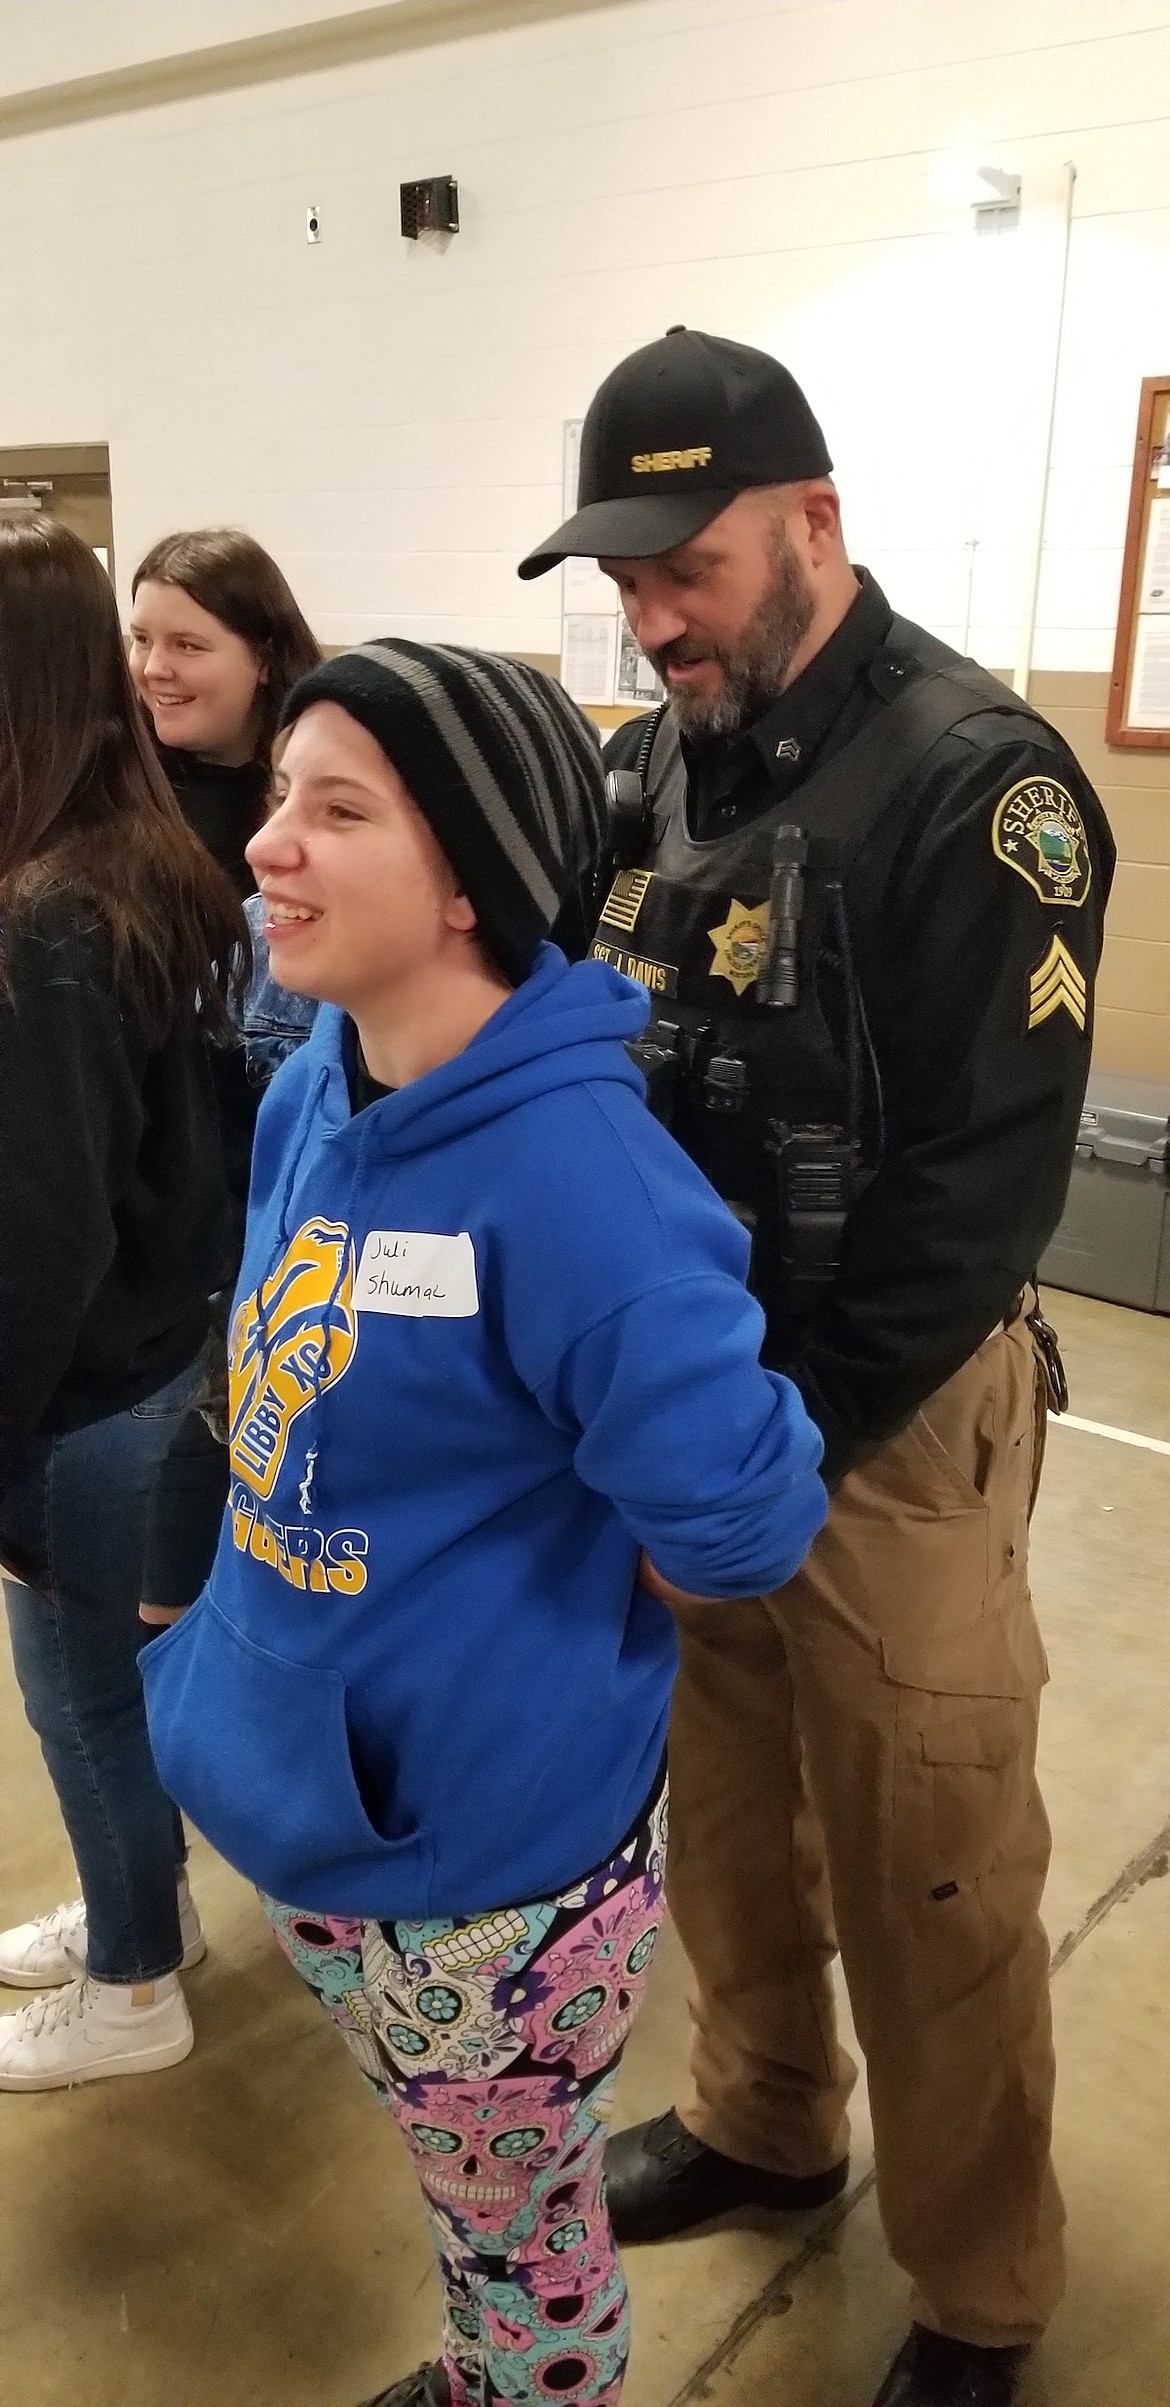 Lincoln County Sheriff's Office Sgt. Jon Davis shares a laugh with Juli Shumate while showing her handcuffs are used on Dec. 15. (Photo courtesy Jerica O'Neil)